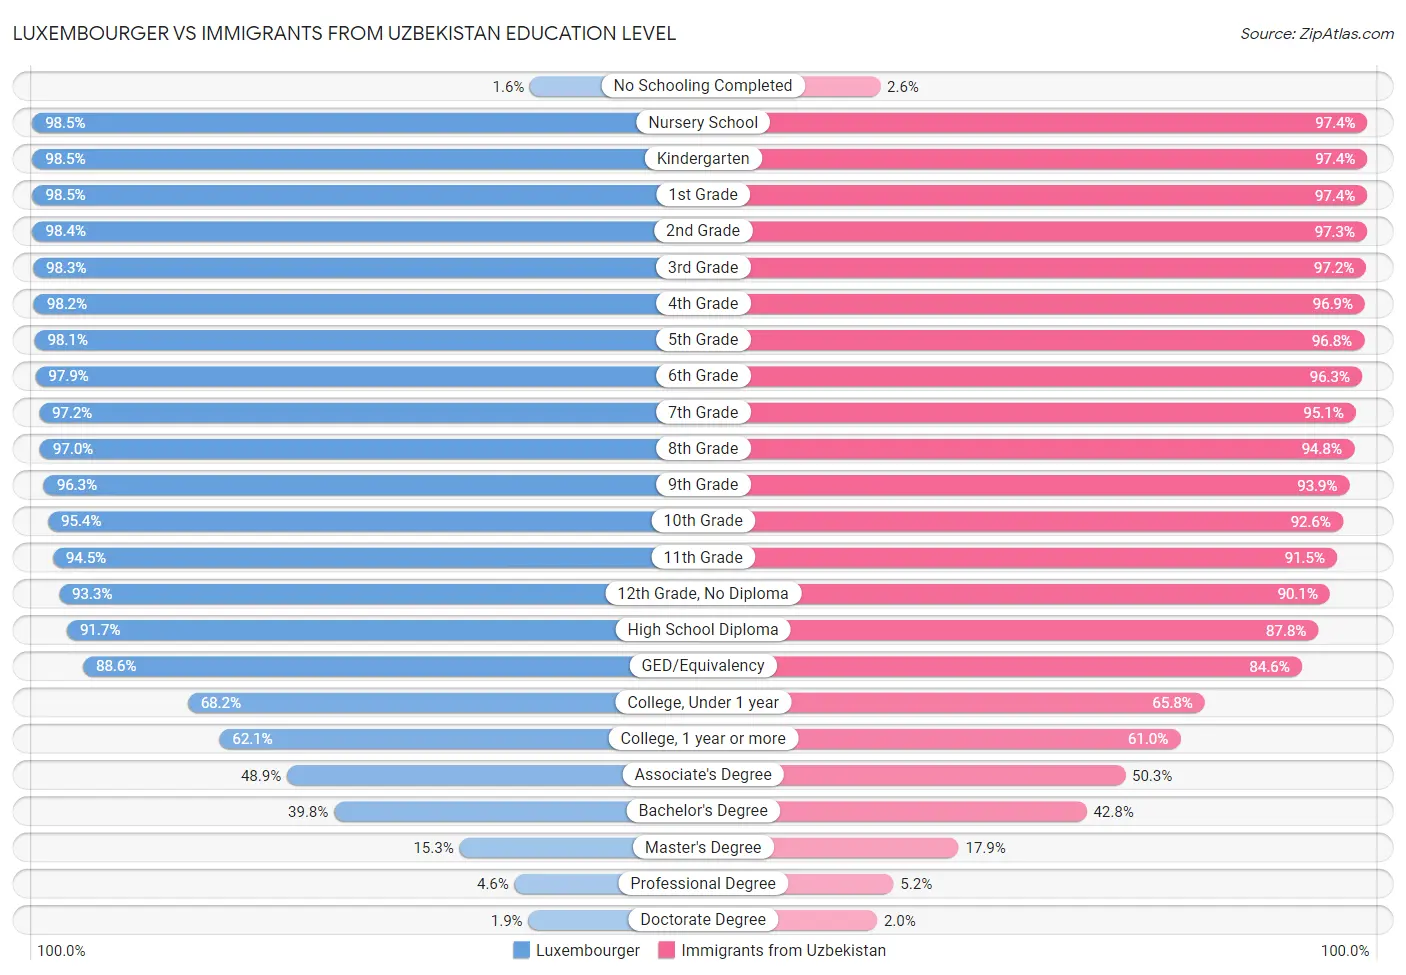 Luxembourger vs Immigrants from Uzbekistan Education Level